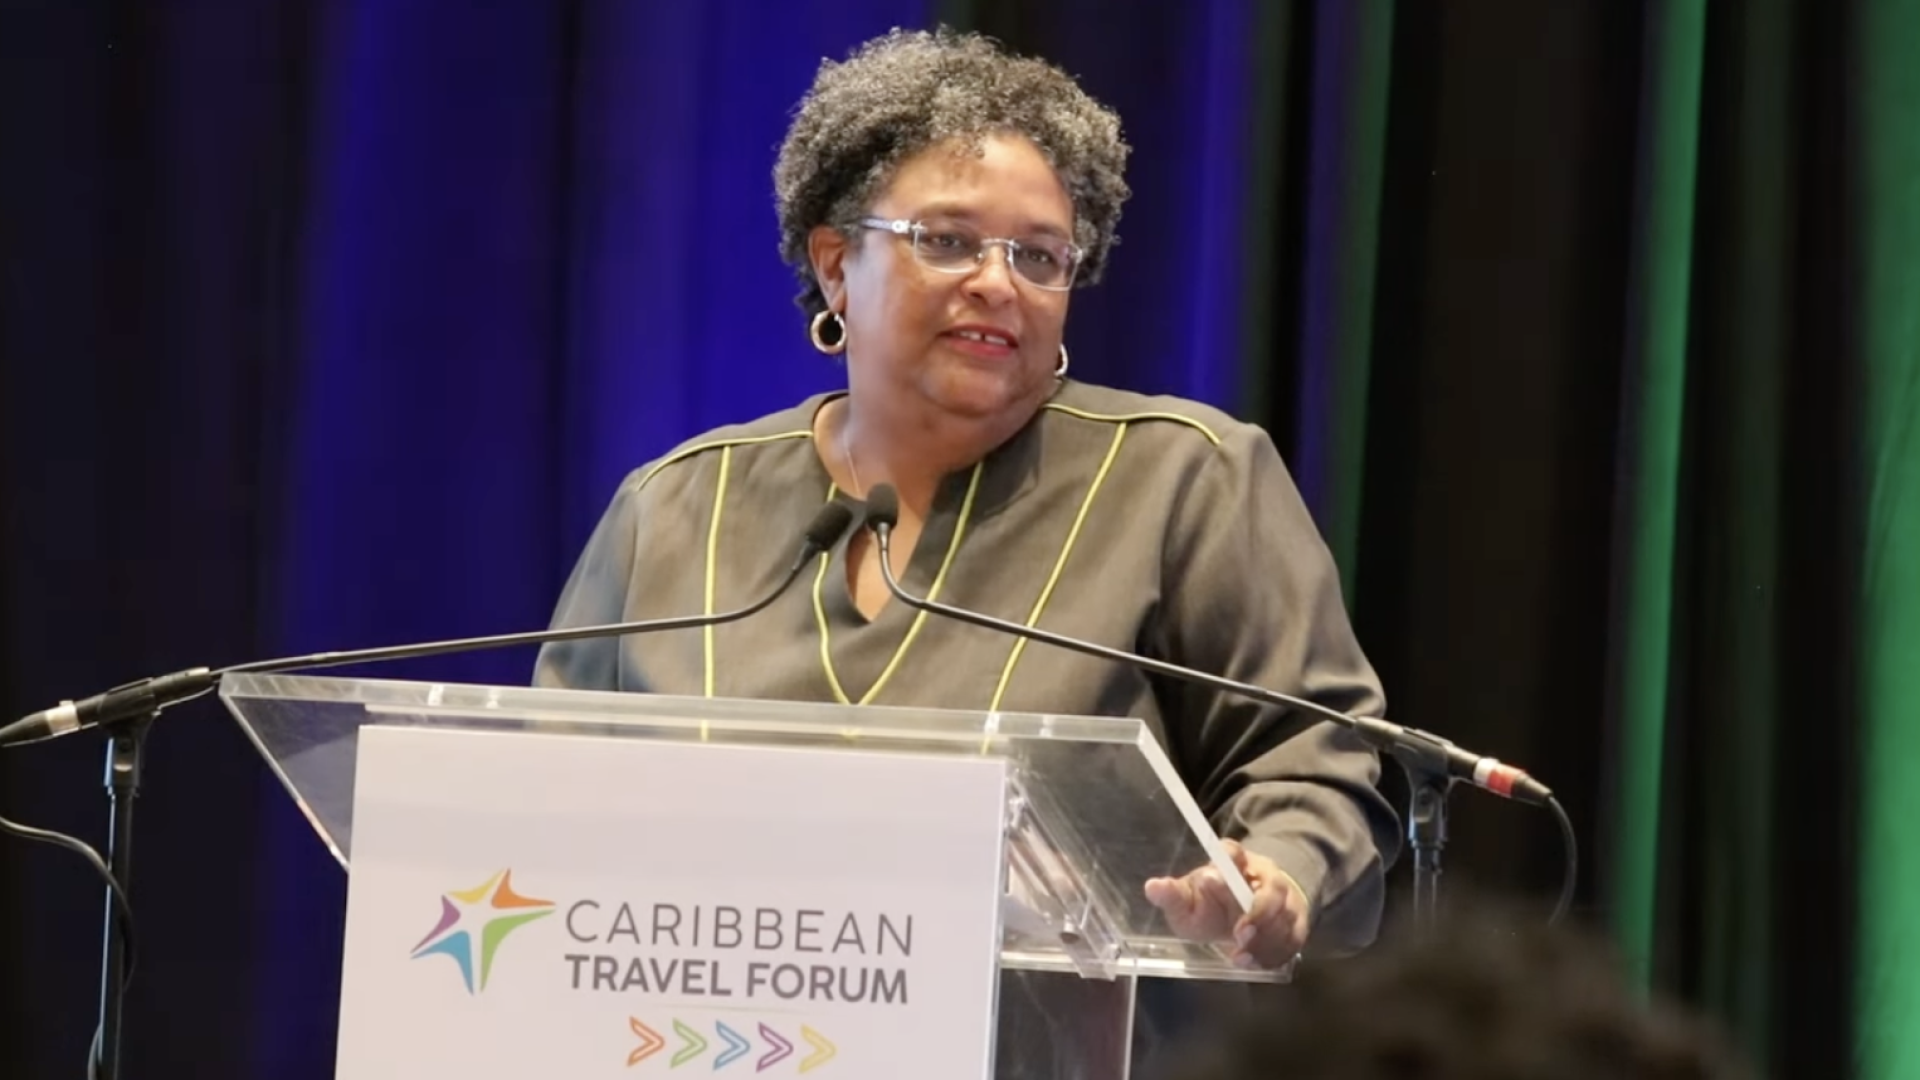 "Emancipate Yourself": Prime Minister Mia Mottley Calls On Caribbean Leaders To Shape Their Own Destiny In Inspiring Speech